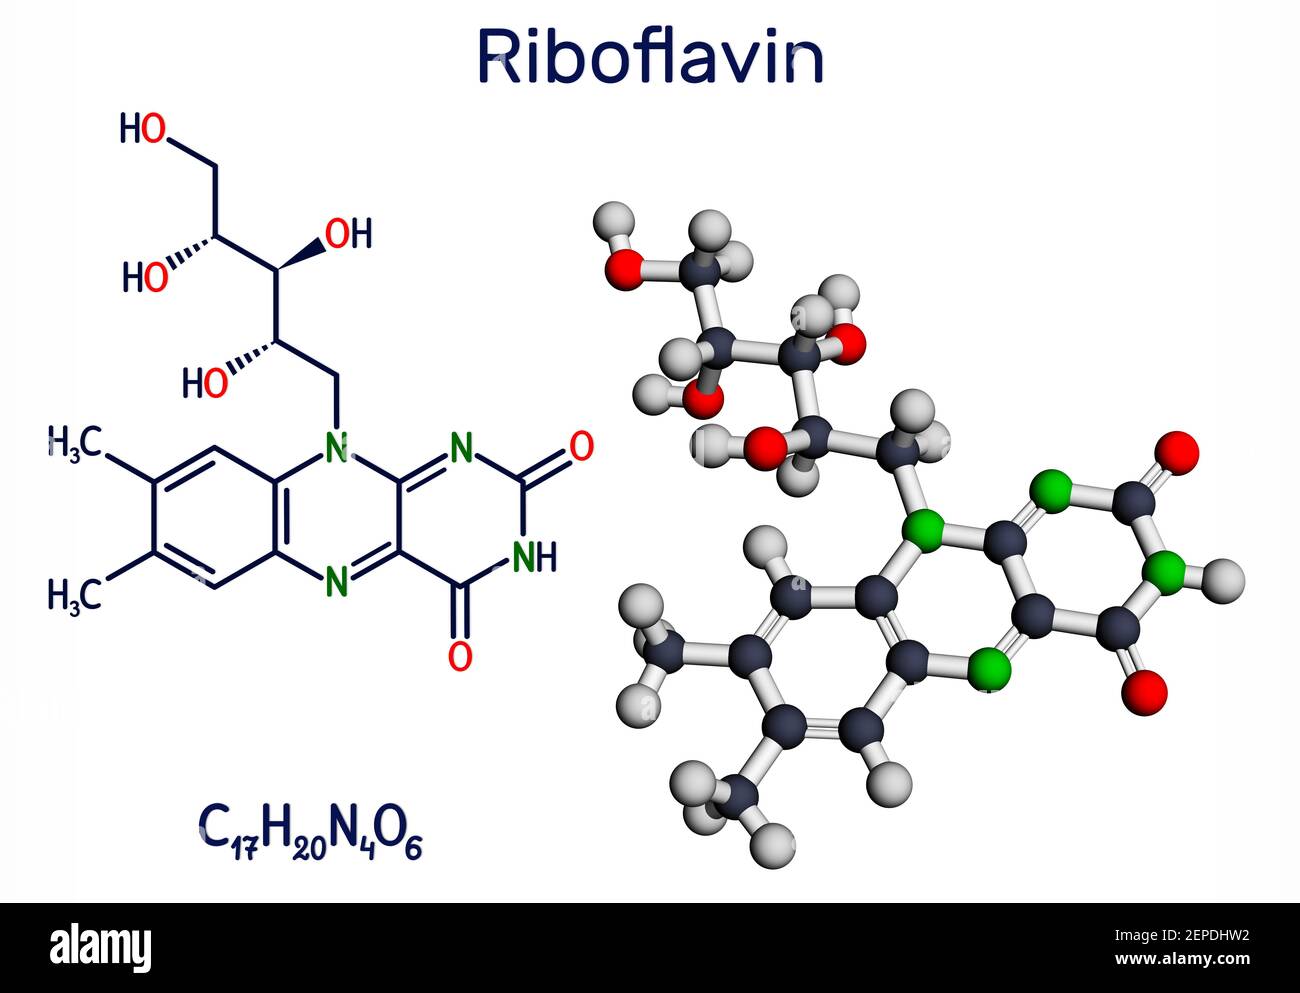 Riboflavin, vitamin B2 molecule.  It is water-soluble flavin, is found in food, used as a dietary supplement E101.  Structural chemical formula and mo Stock Photo